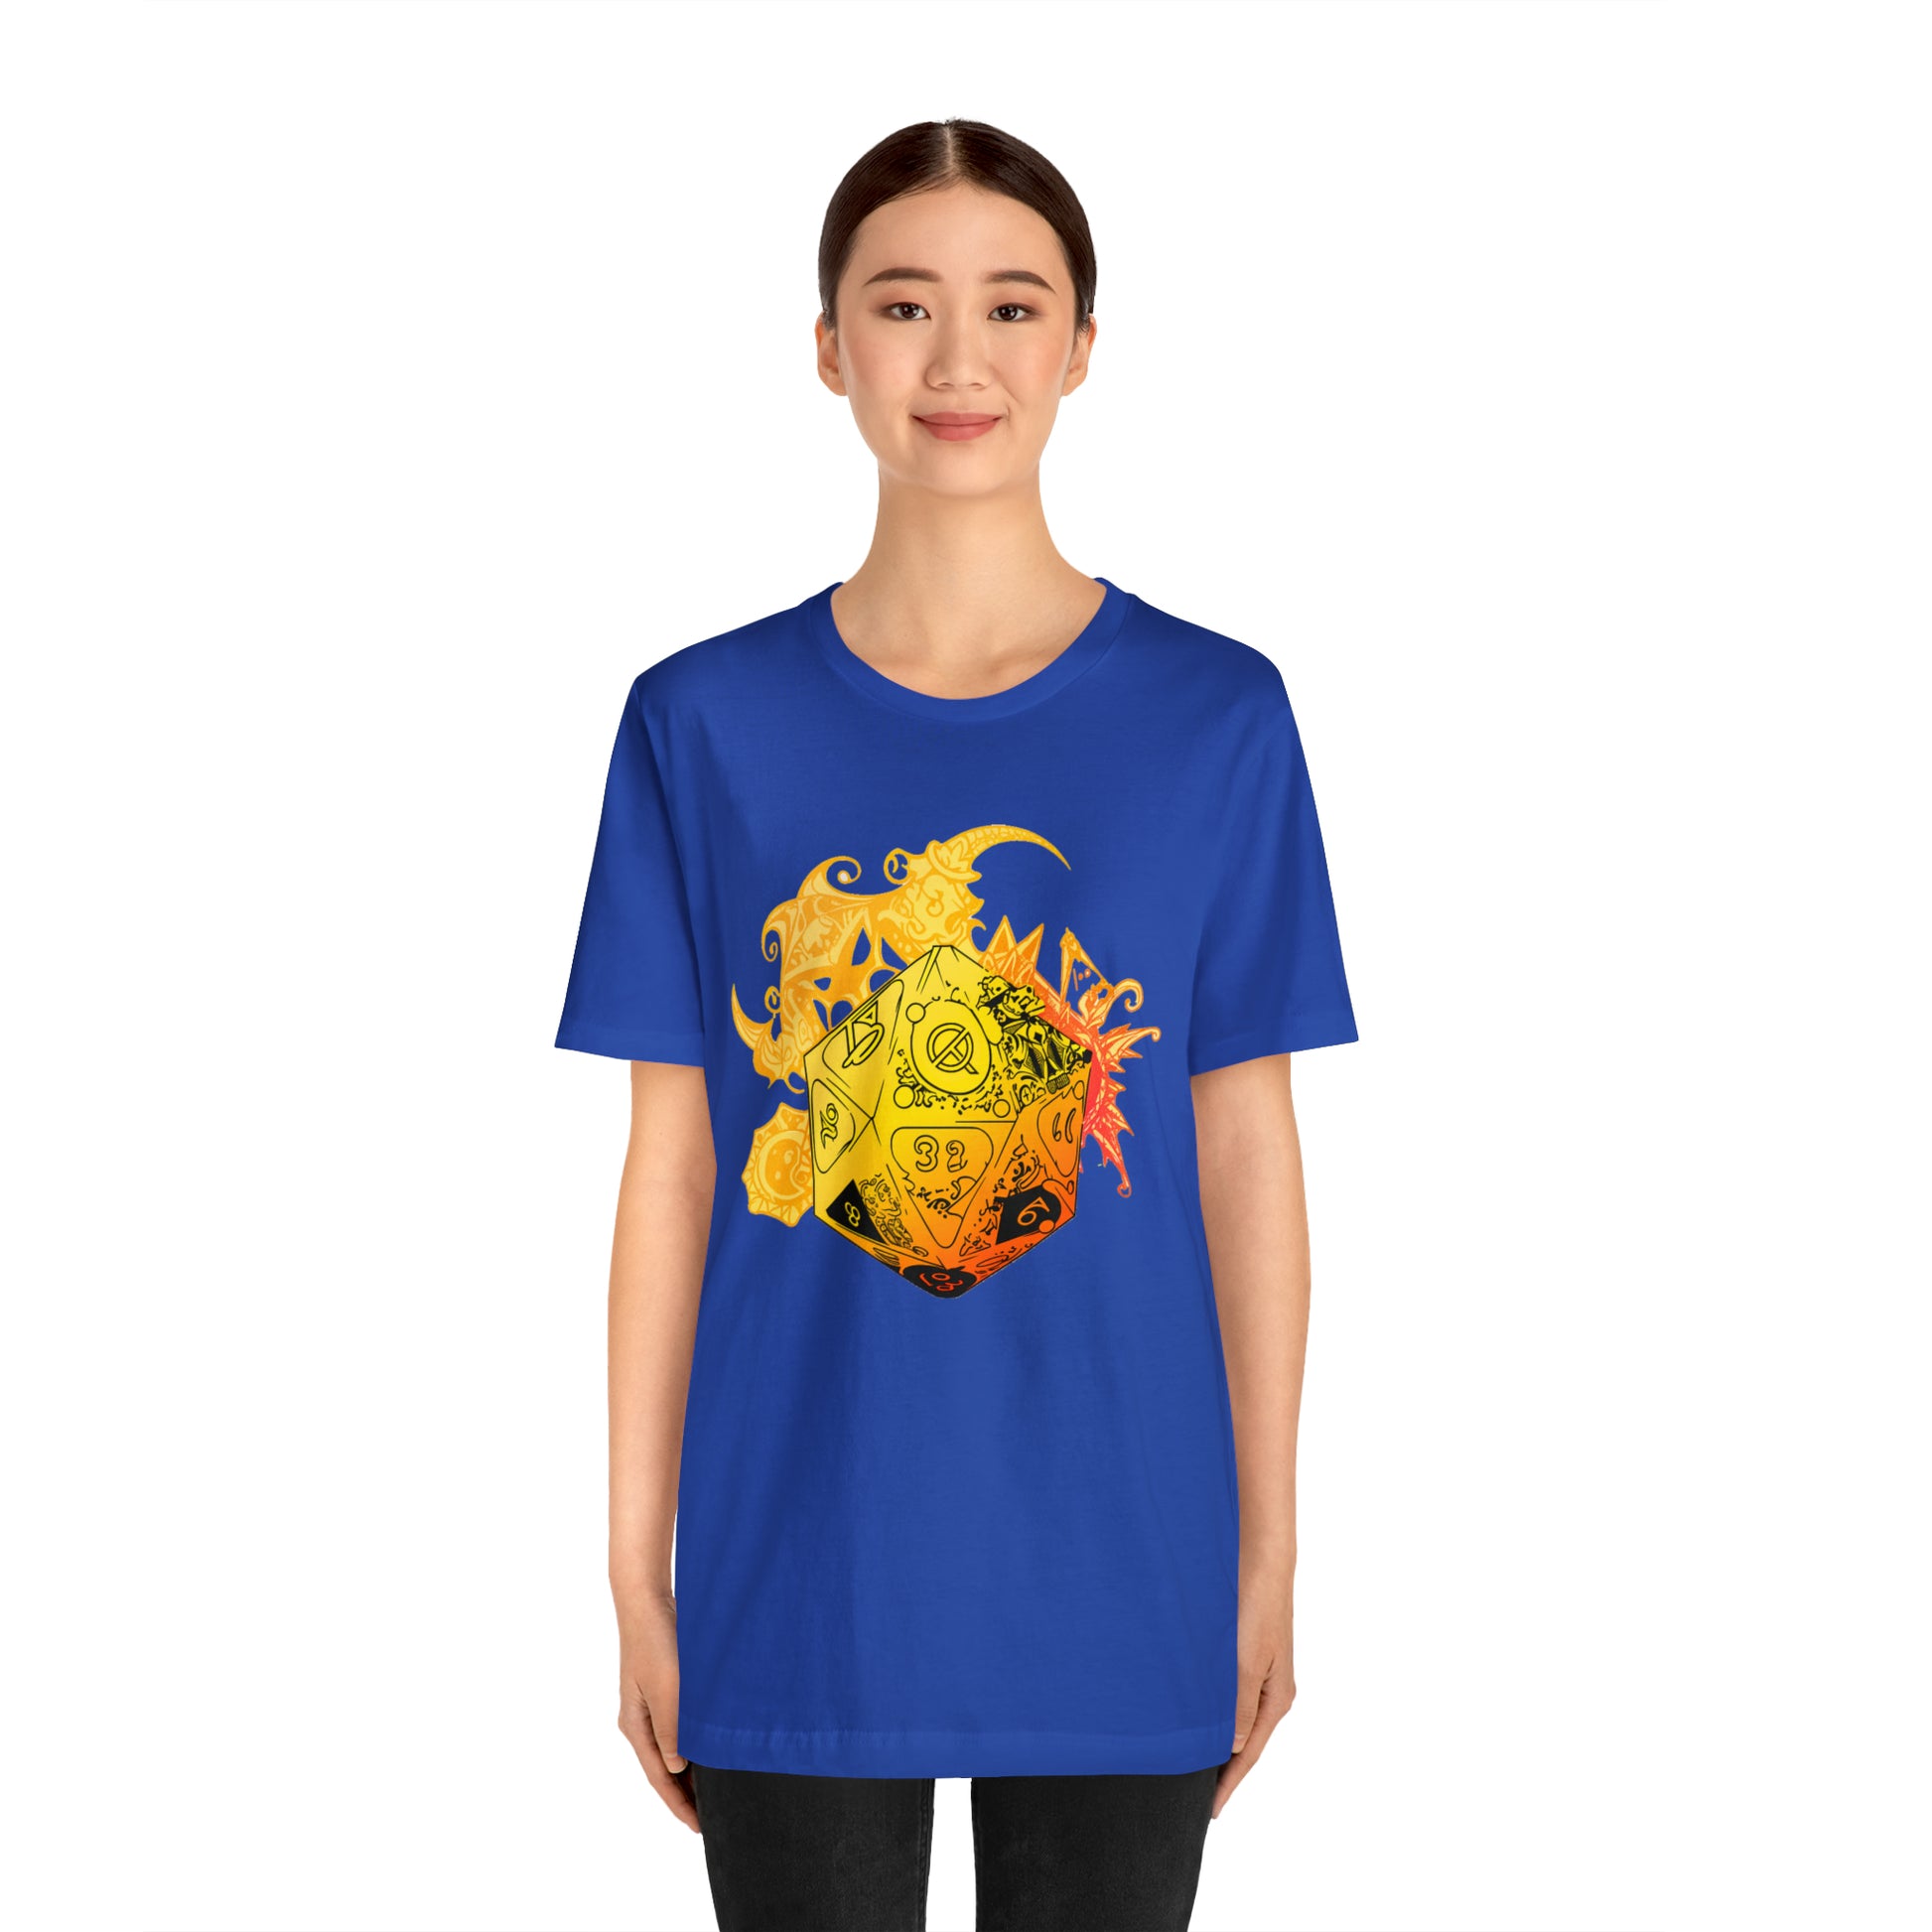 true-royal-quest-thread-tee-shirt-with-large-yellow-dragon-dice-on-center-of-shirt